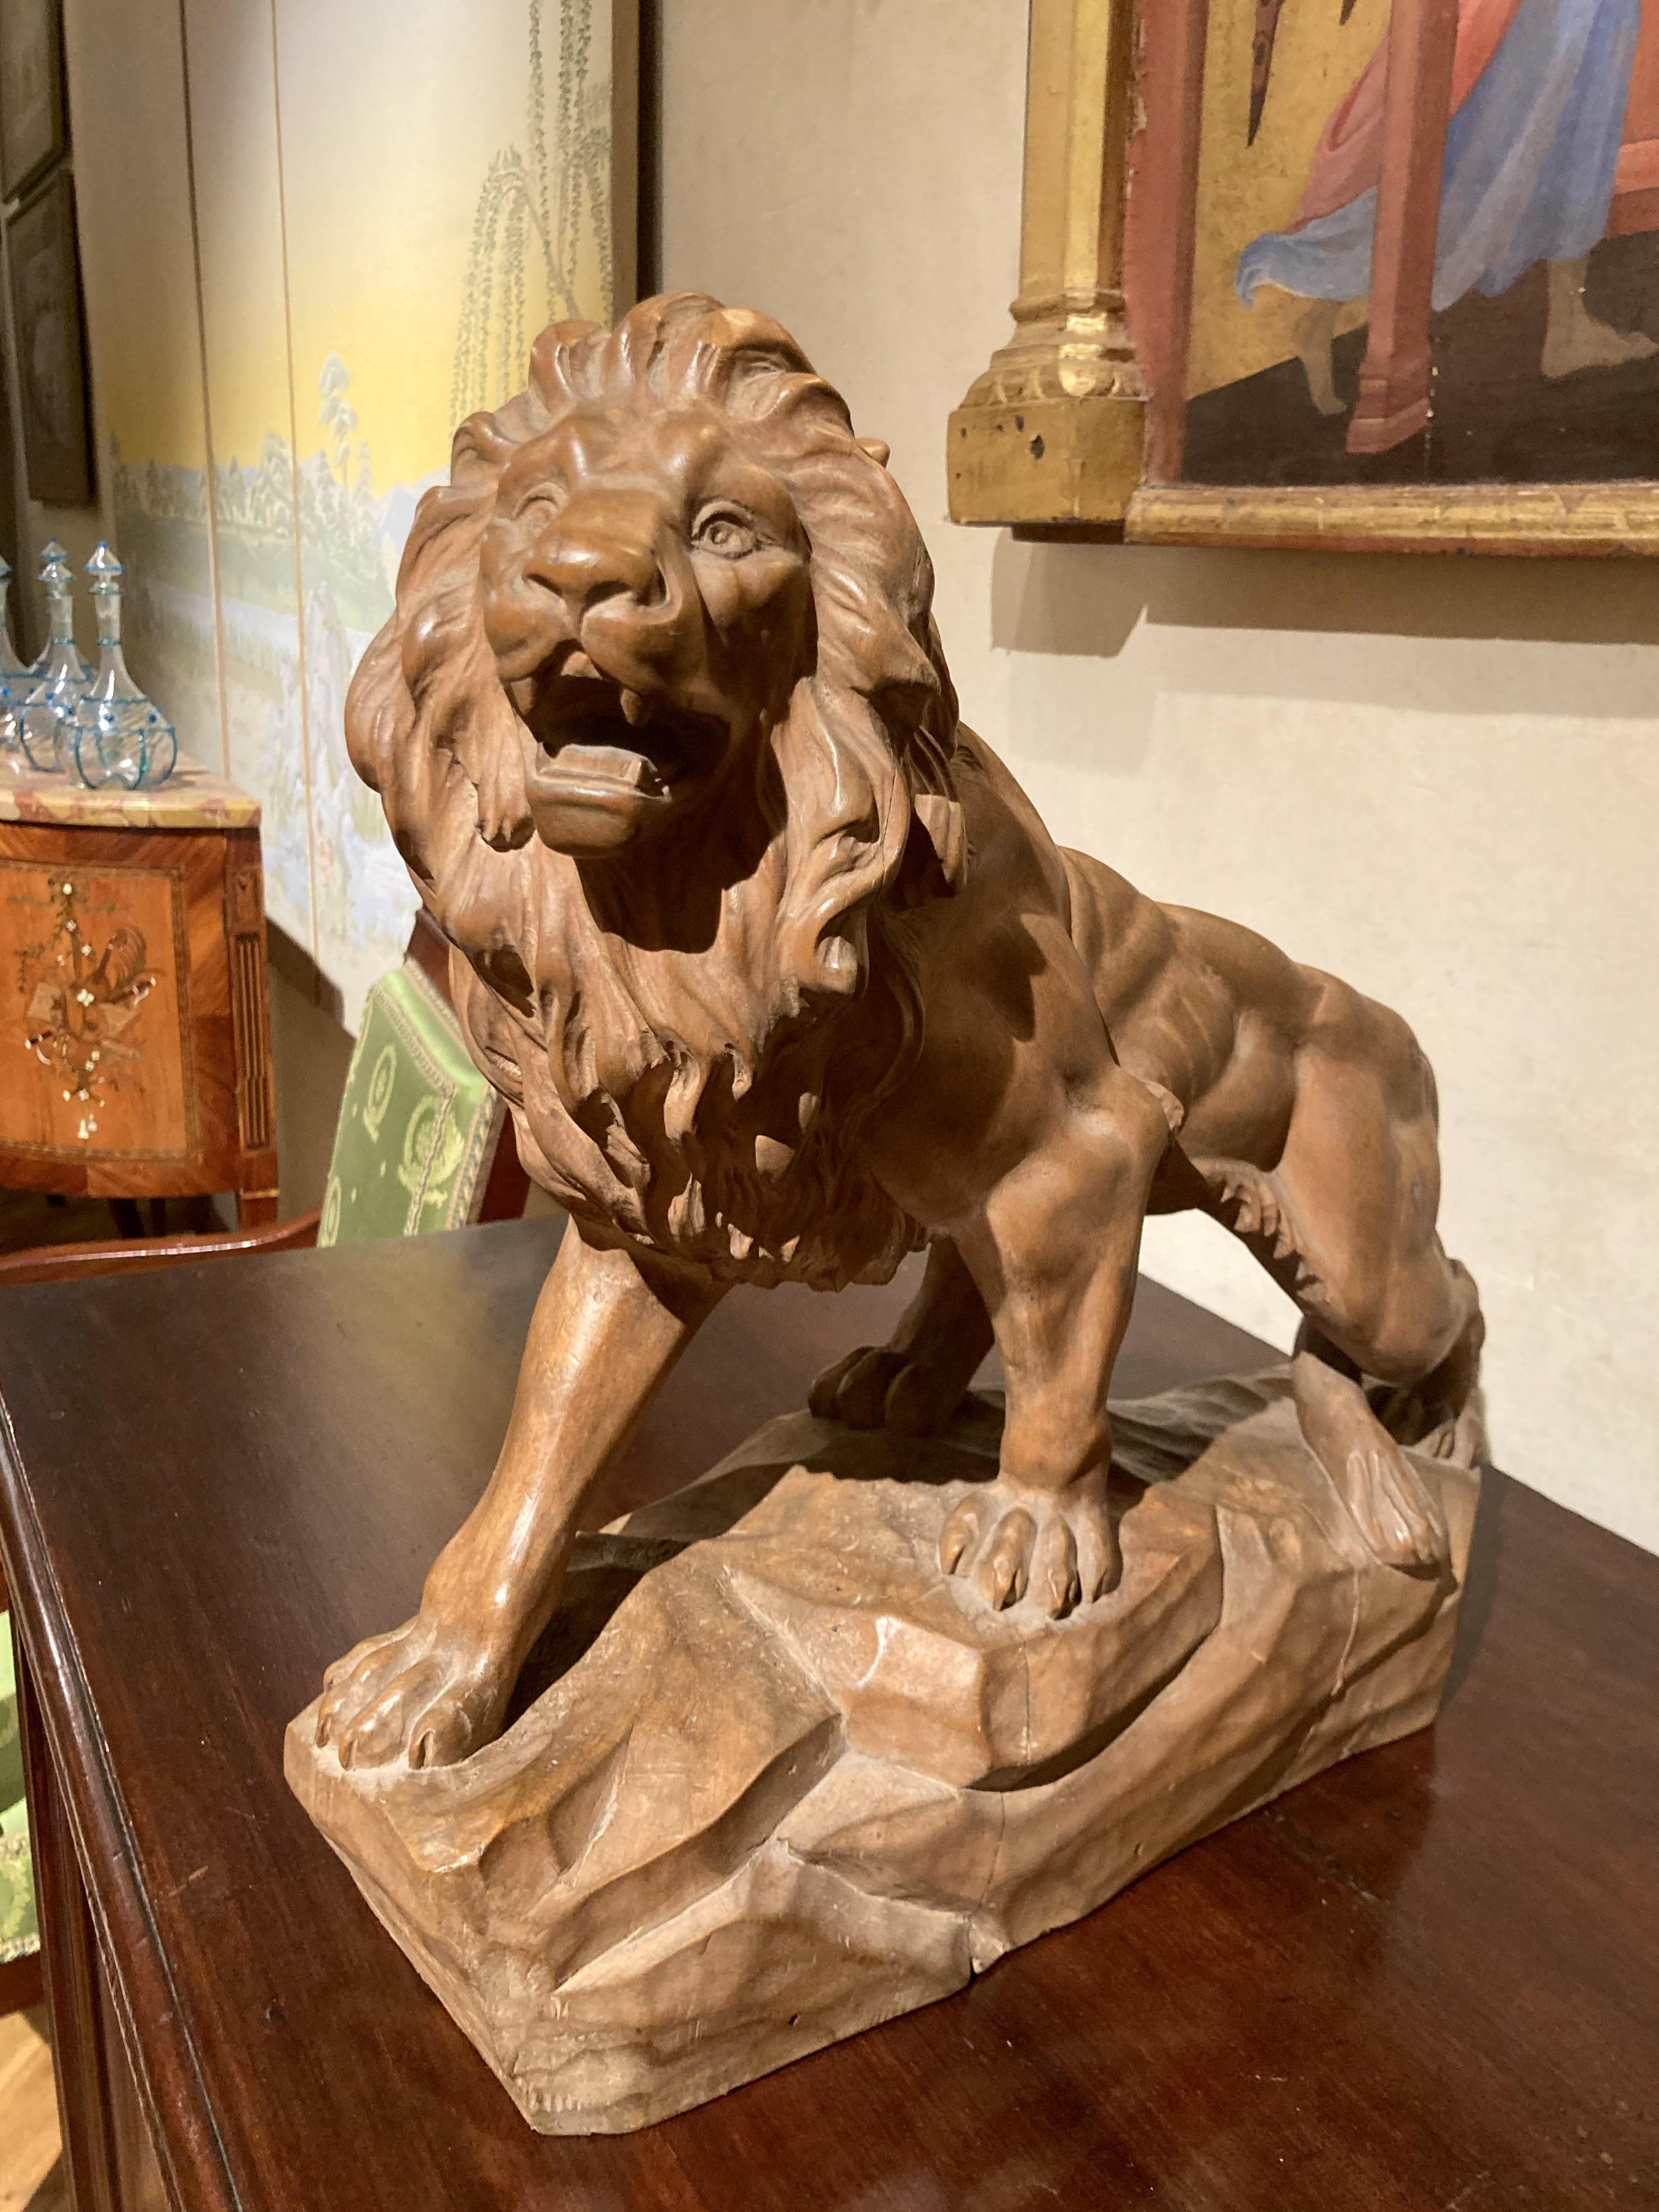 This 19th century big scale Italian animalier sculpure features a lion striding forward on a root-wood base, snarling with open mouth and expressive eyes enlivening its rippling mane with an extremely realistic sense of motion. The wooden statue,